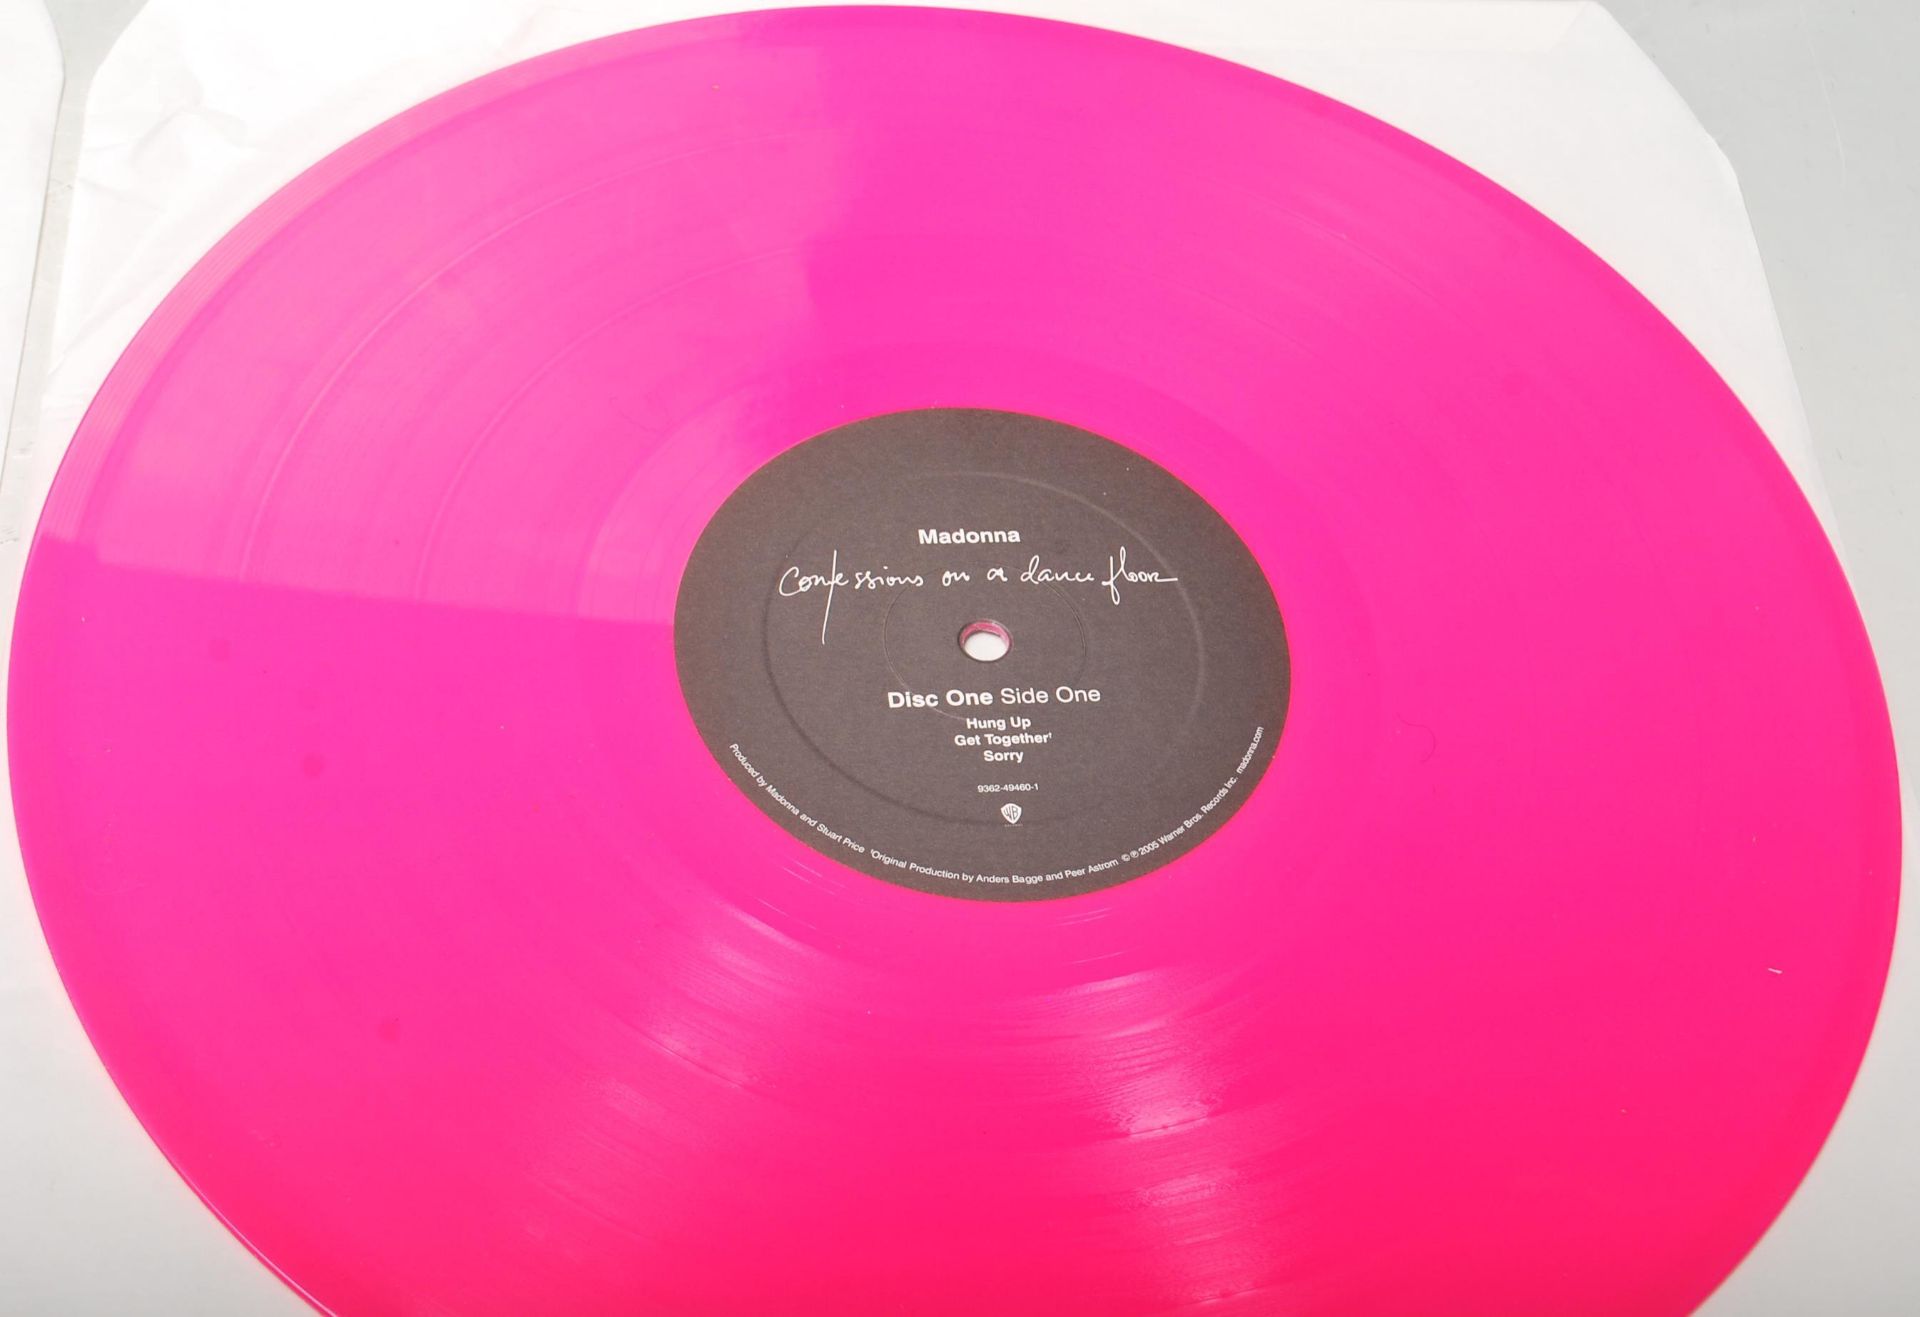 A vinyl long play LP record by Madonna - Confessions on a dance floor. Limited Edition Pink Vinyl. - Bild 3 aus 6